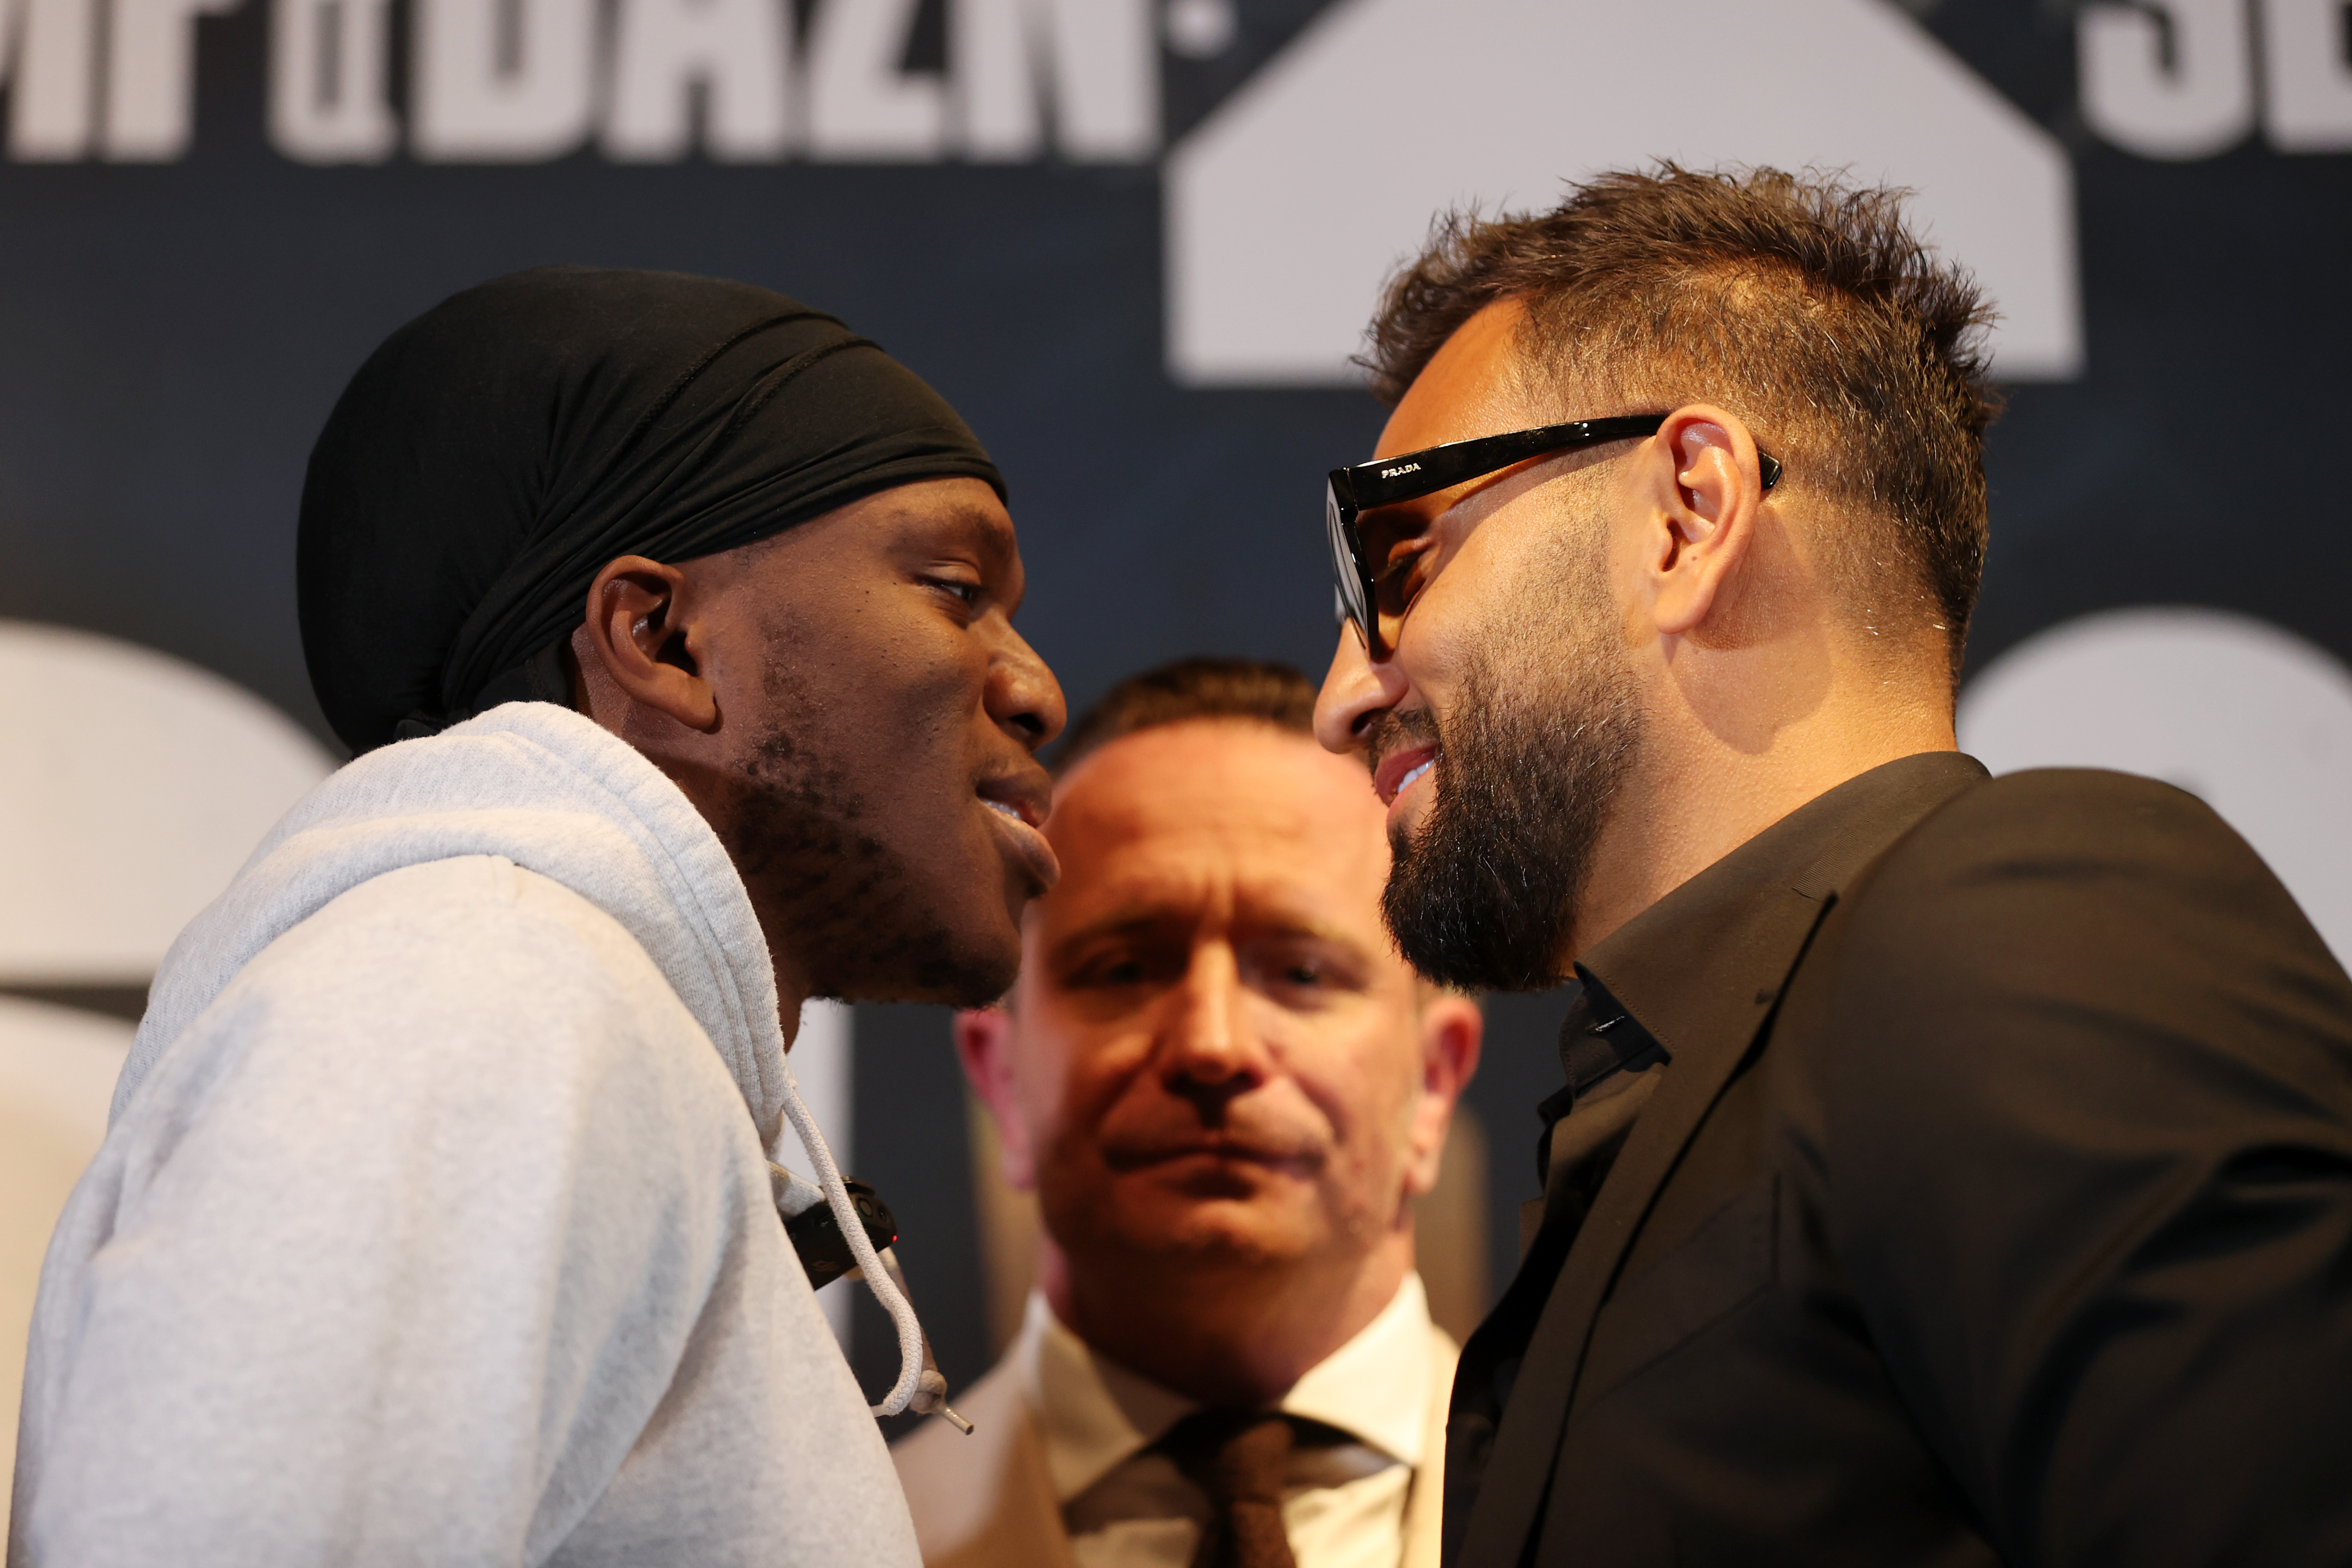 KSI vs Fournier what time is fight, PPV price, TV channel?